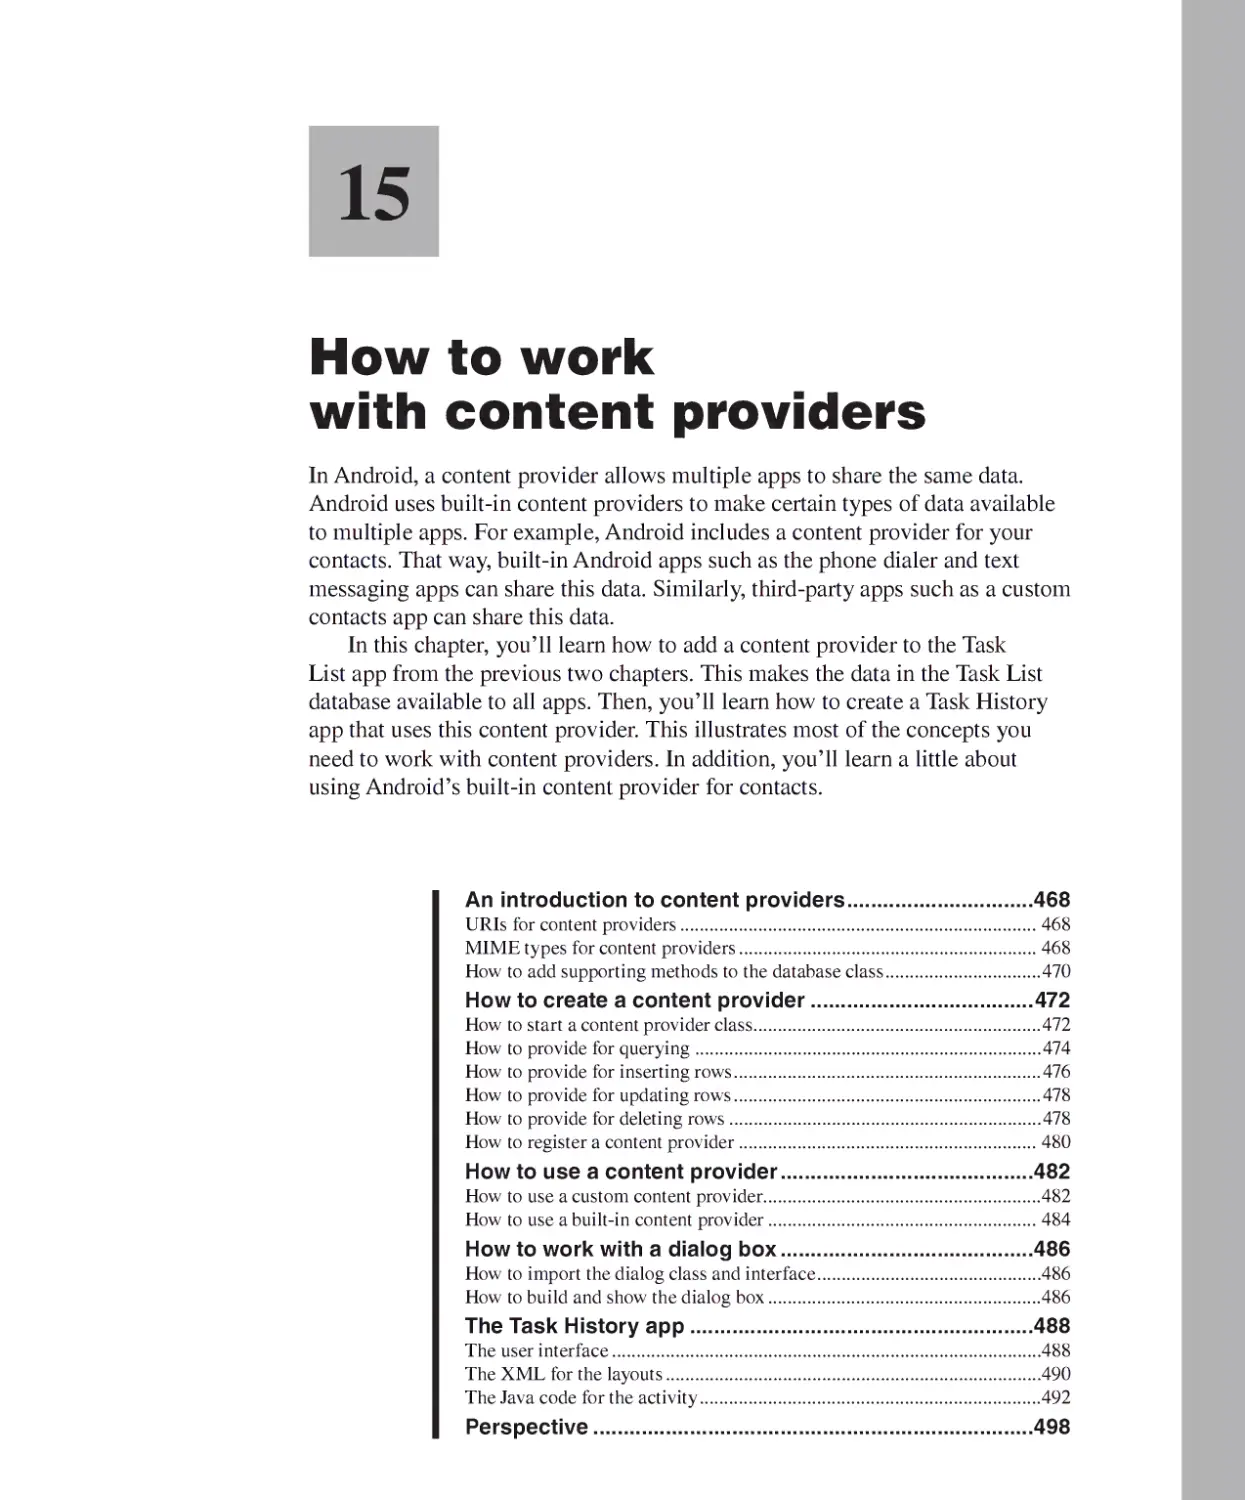 Chapter 15 - How to Work with Content Providers